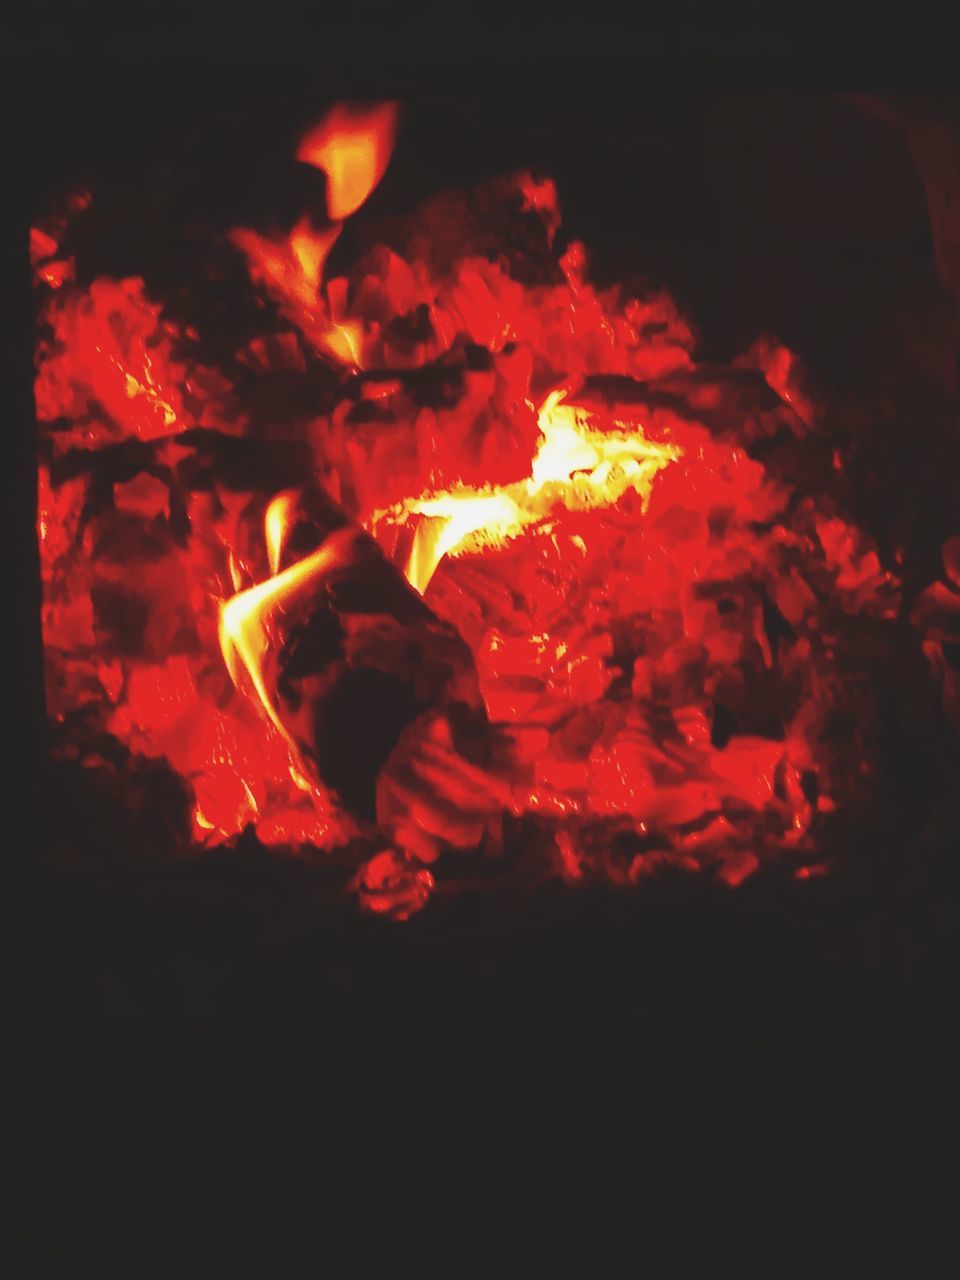 fire, heat, burning, flame, campfire, nature, night, fireplace, bonfire, glowing, no people, red, orange color, log, wood, outdoors